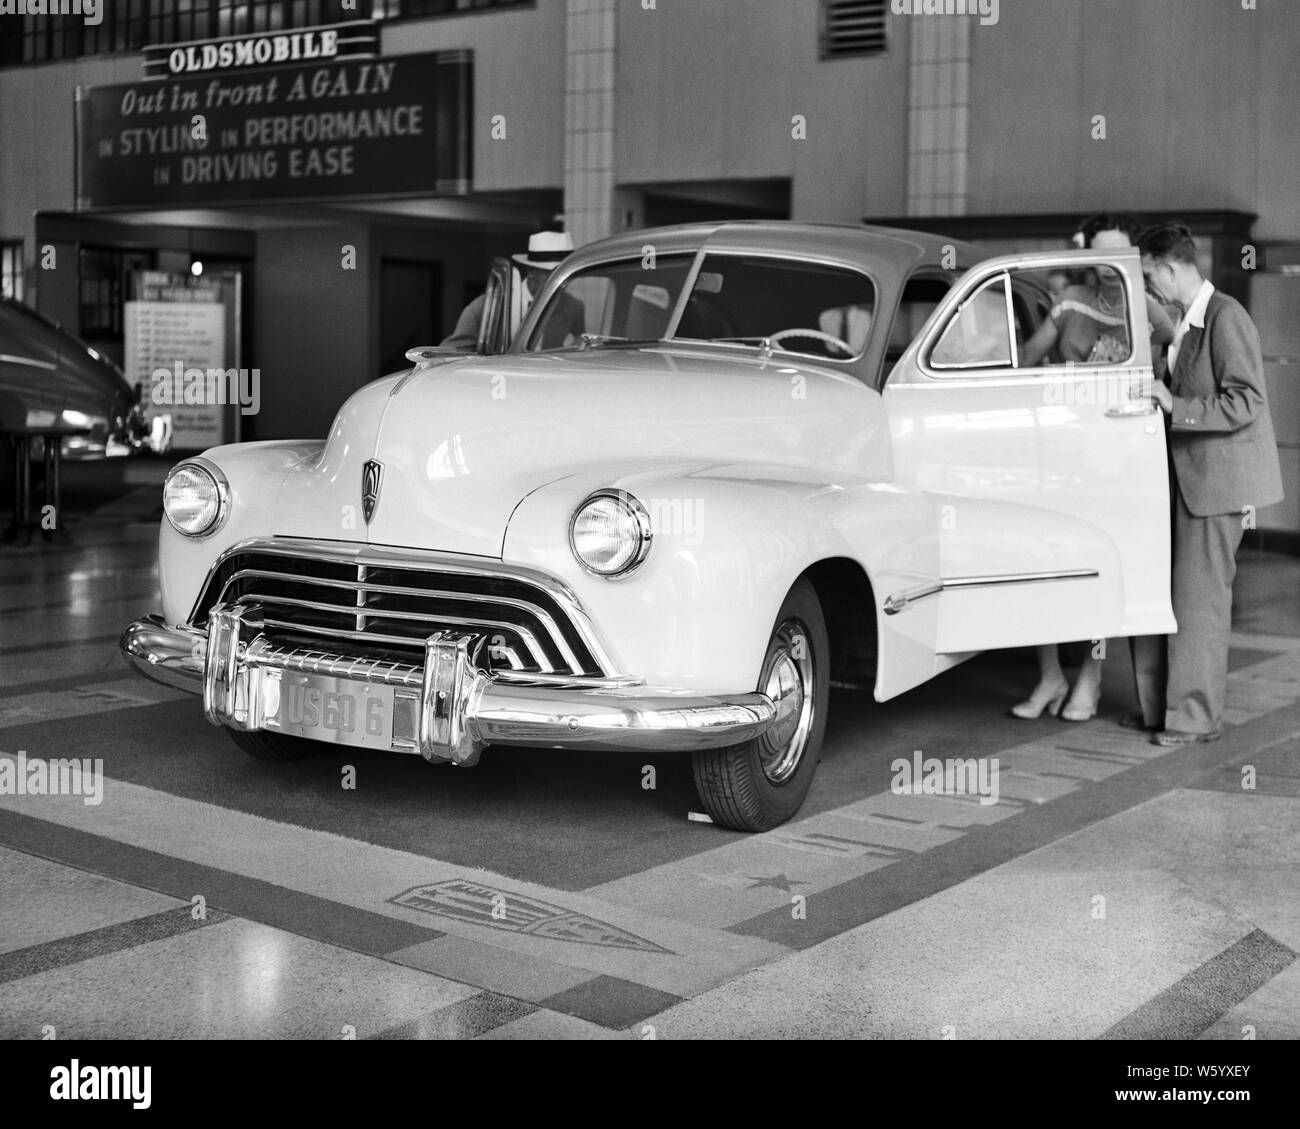 1940s COUPLE LOOKING AT NEW CAR 1946 MODEL AT OLDSMOBILE AUTO DEALERSHIP AT 1730 BROADWAY NYC - q45318 CPC001 HARS SHOWROOM LIFESTYLE FEMALES MARRIED DECISION SPOUSE HUSBANDS LUXURY UNITED STATES COPY SPACE LADIES DEALERSHIP PERSONS UNITED STATES OF AMERICA AUTOMOBILE MALES DEALER TRANSPORTATION B&W PARTNER SHOPPER GOALS SHOPPERS TEMPTATION CUSTOMER SERVICE AUTOS OLDSMOBILE CHOICE PROGRESS INNOVATION OPPORTUNITY NYC PURCHASE CONCEPTUAL NEW YORK AUTOMOBILES CITIES STYLISH VEHICLES 1946 NEW YORK CITY NEW CAR BROADWAY COOPERATION WIVES BLACK AND WHITE CAUCASIAN ETHNICITY OLD FASHIONED Stock Photo